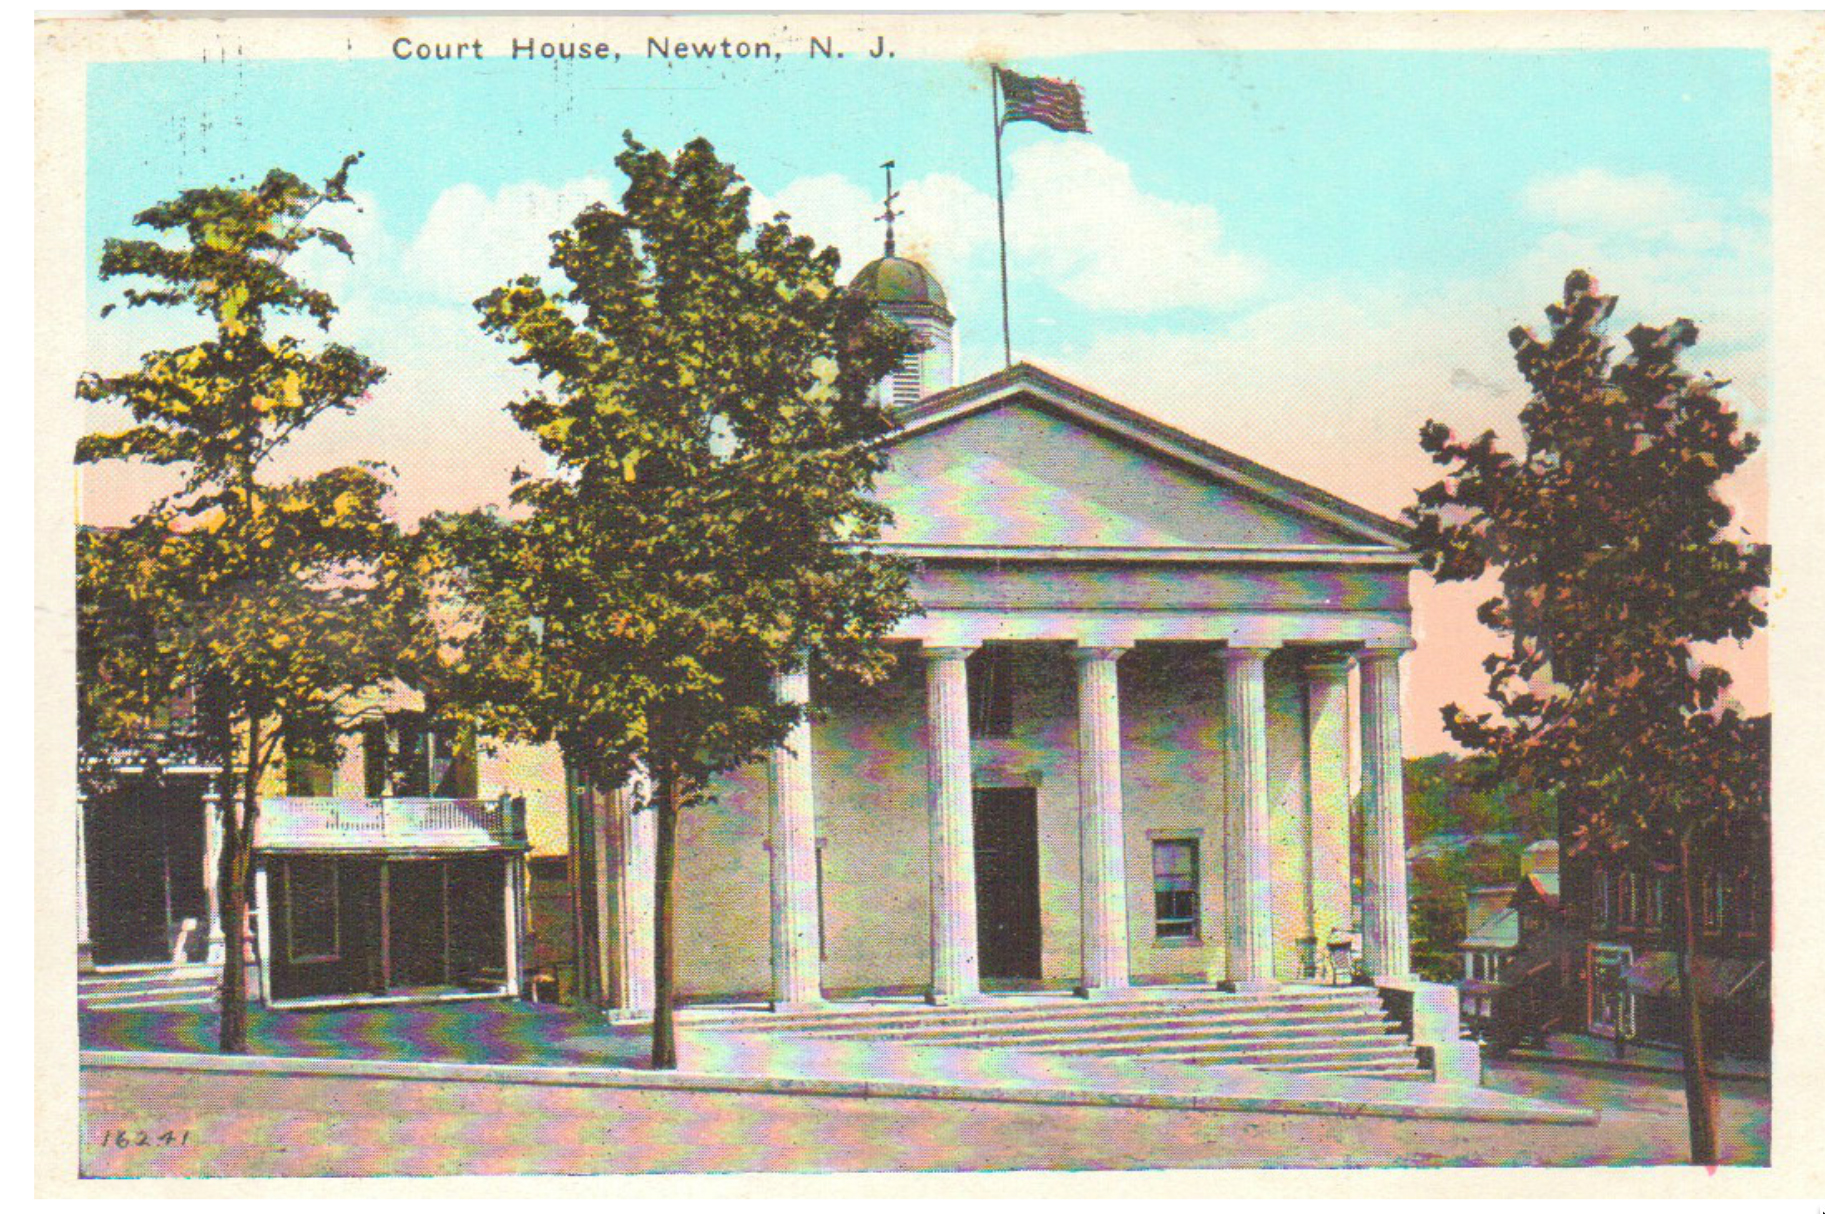 Newton - Sussex County Court House - c 1920